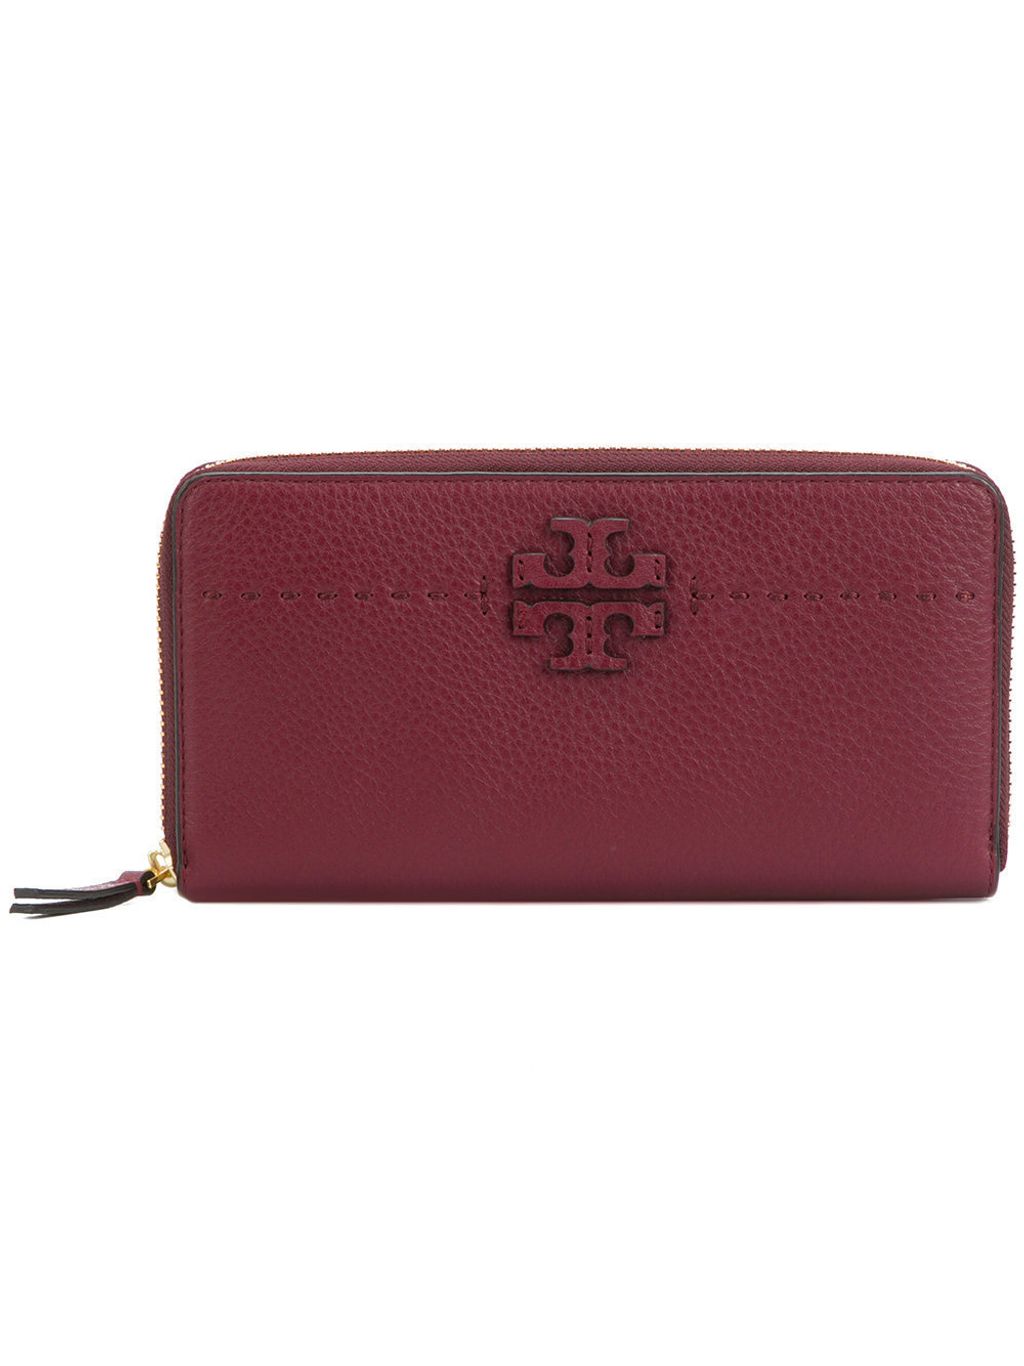 Tory Burch Mcgraw Zip Continental Wallet – Luxe Paradise